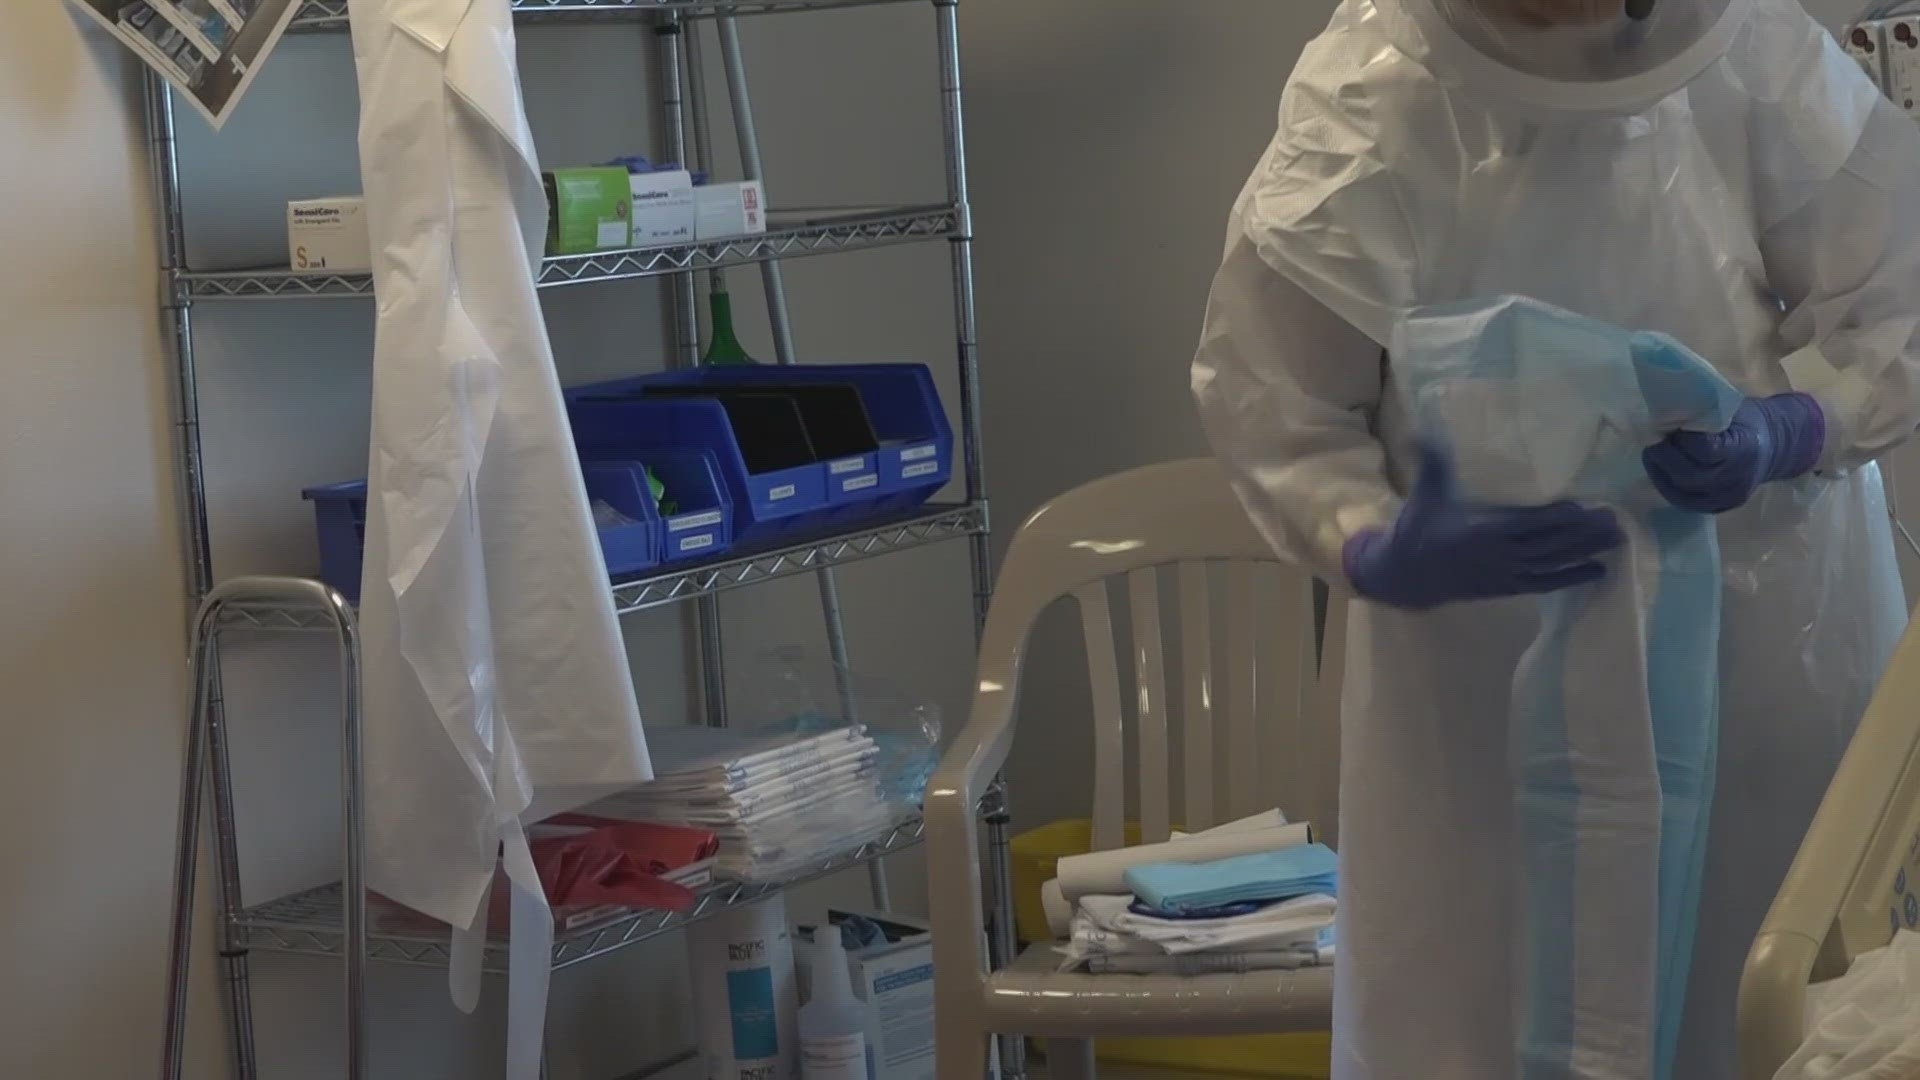 KREM 2's Nathan Hyun took a look into the state-of-the-art ward, three years after COVID-19.